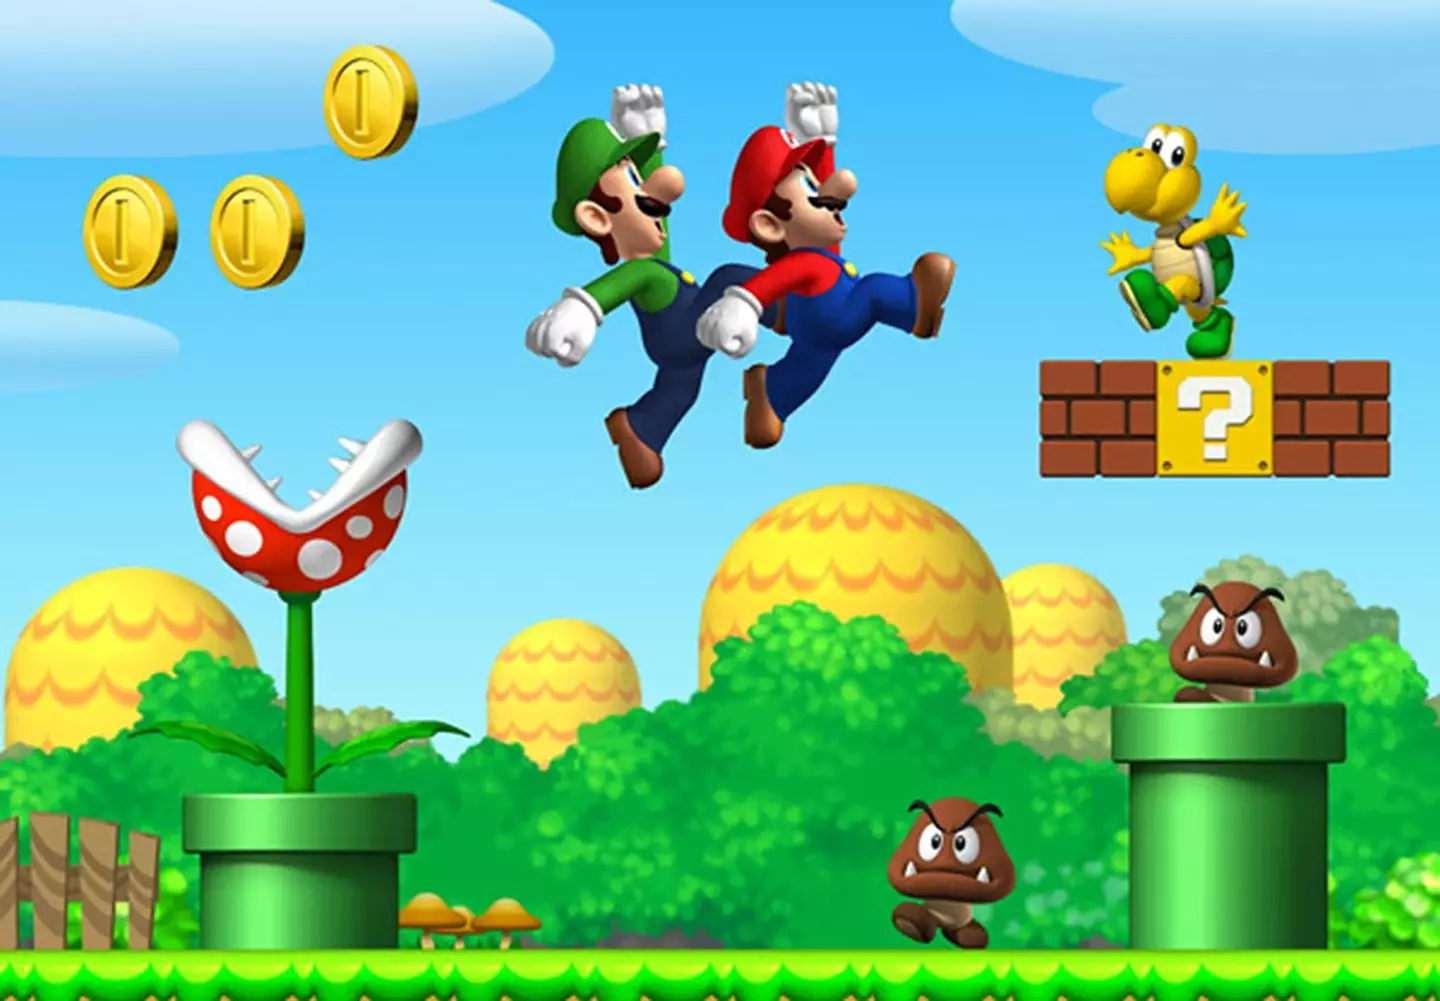 Super Mario and the Nintendo characters have become icons in the world of gaming.